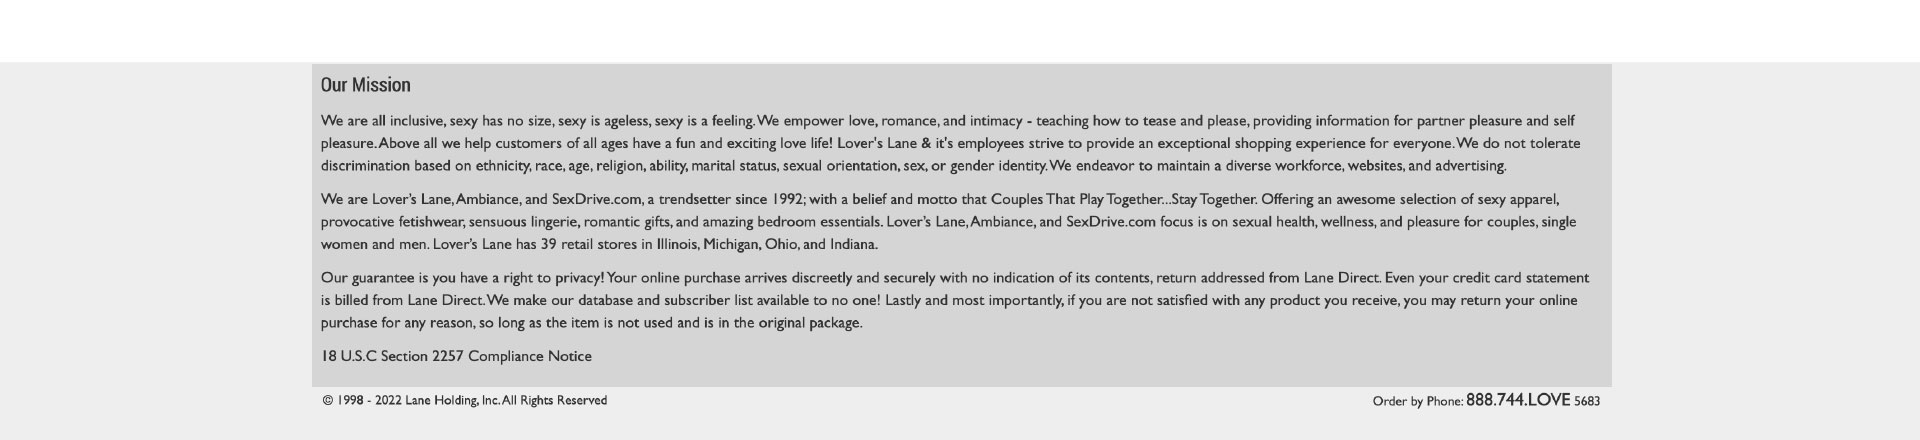 Our Mission Statement -  1998 - 2022 Lane Holdings, Inc., All Rights Reserved. - Order by Phone: 888.744.LOVE 5683